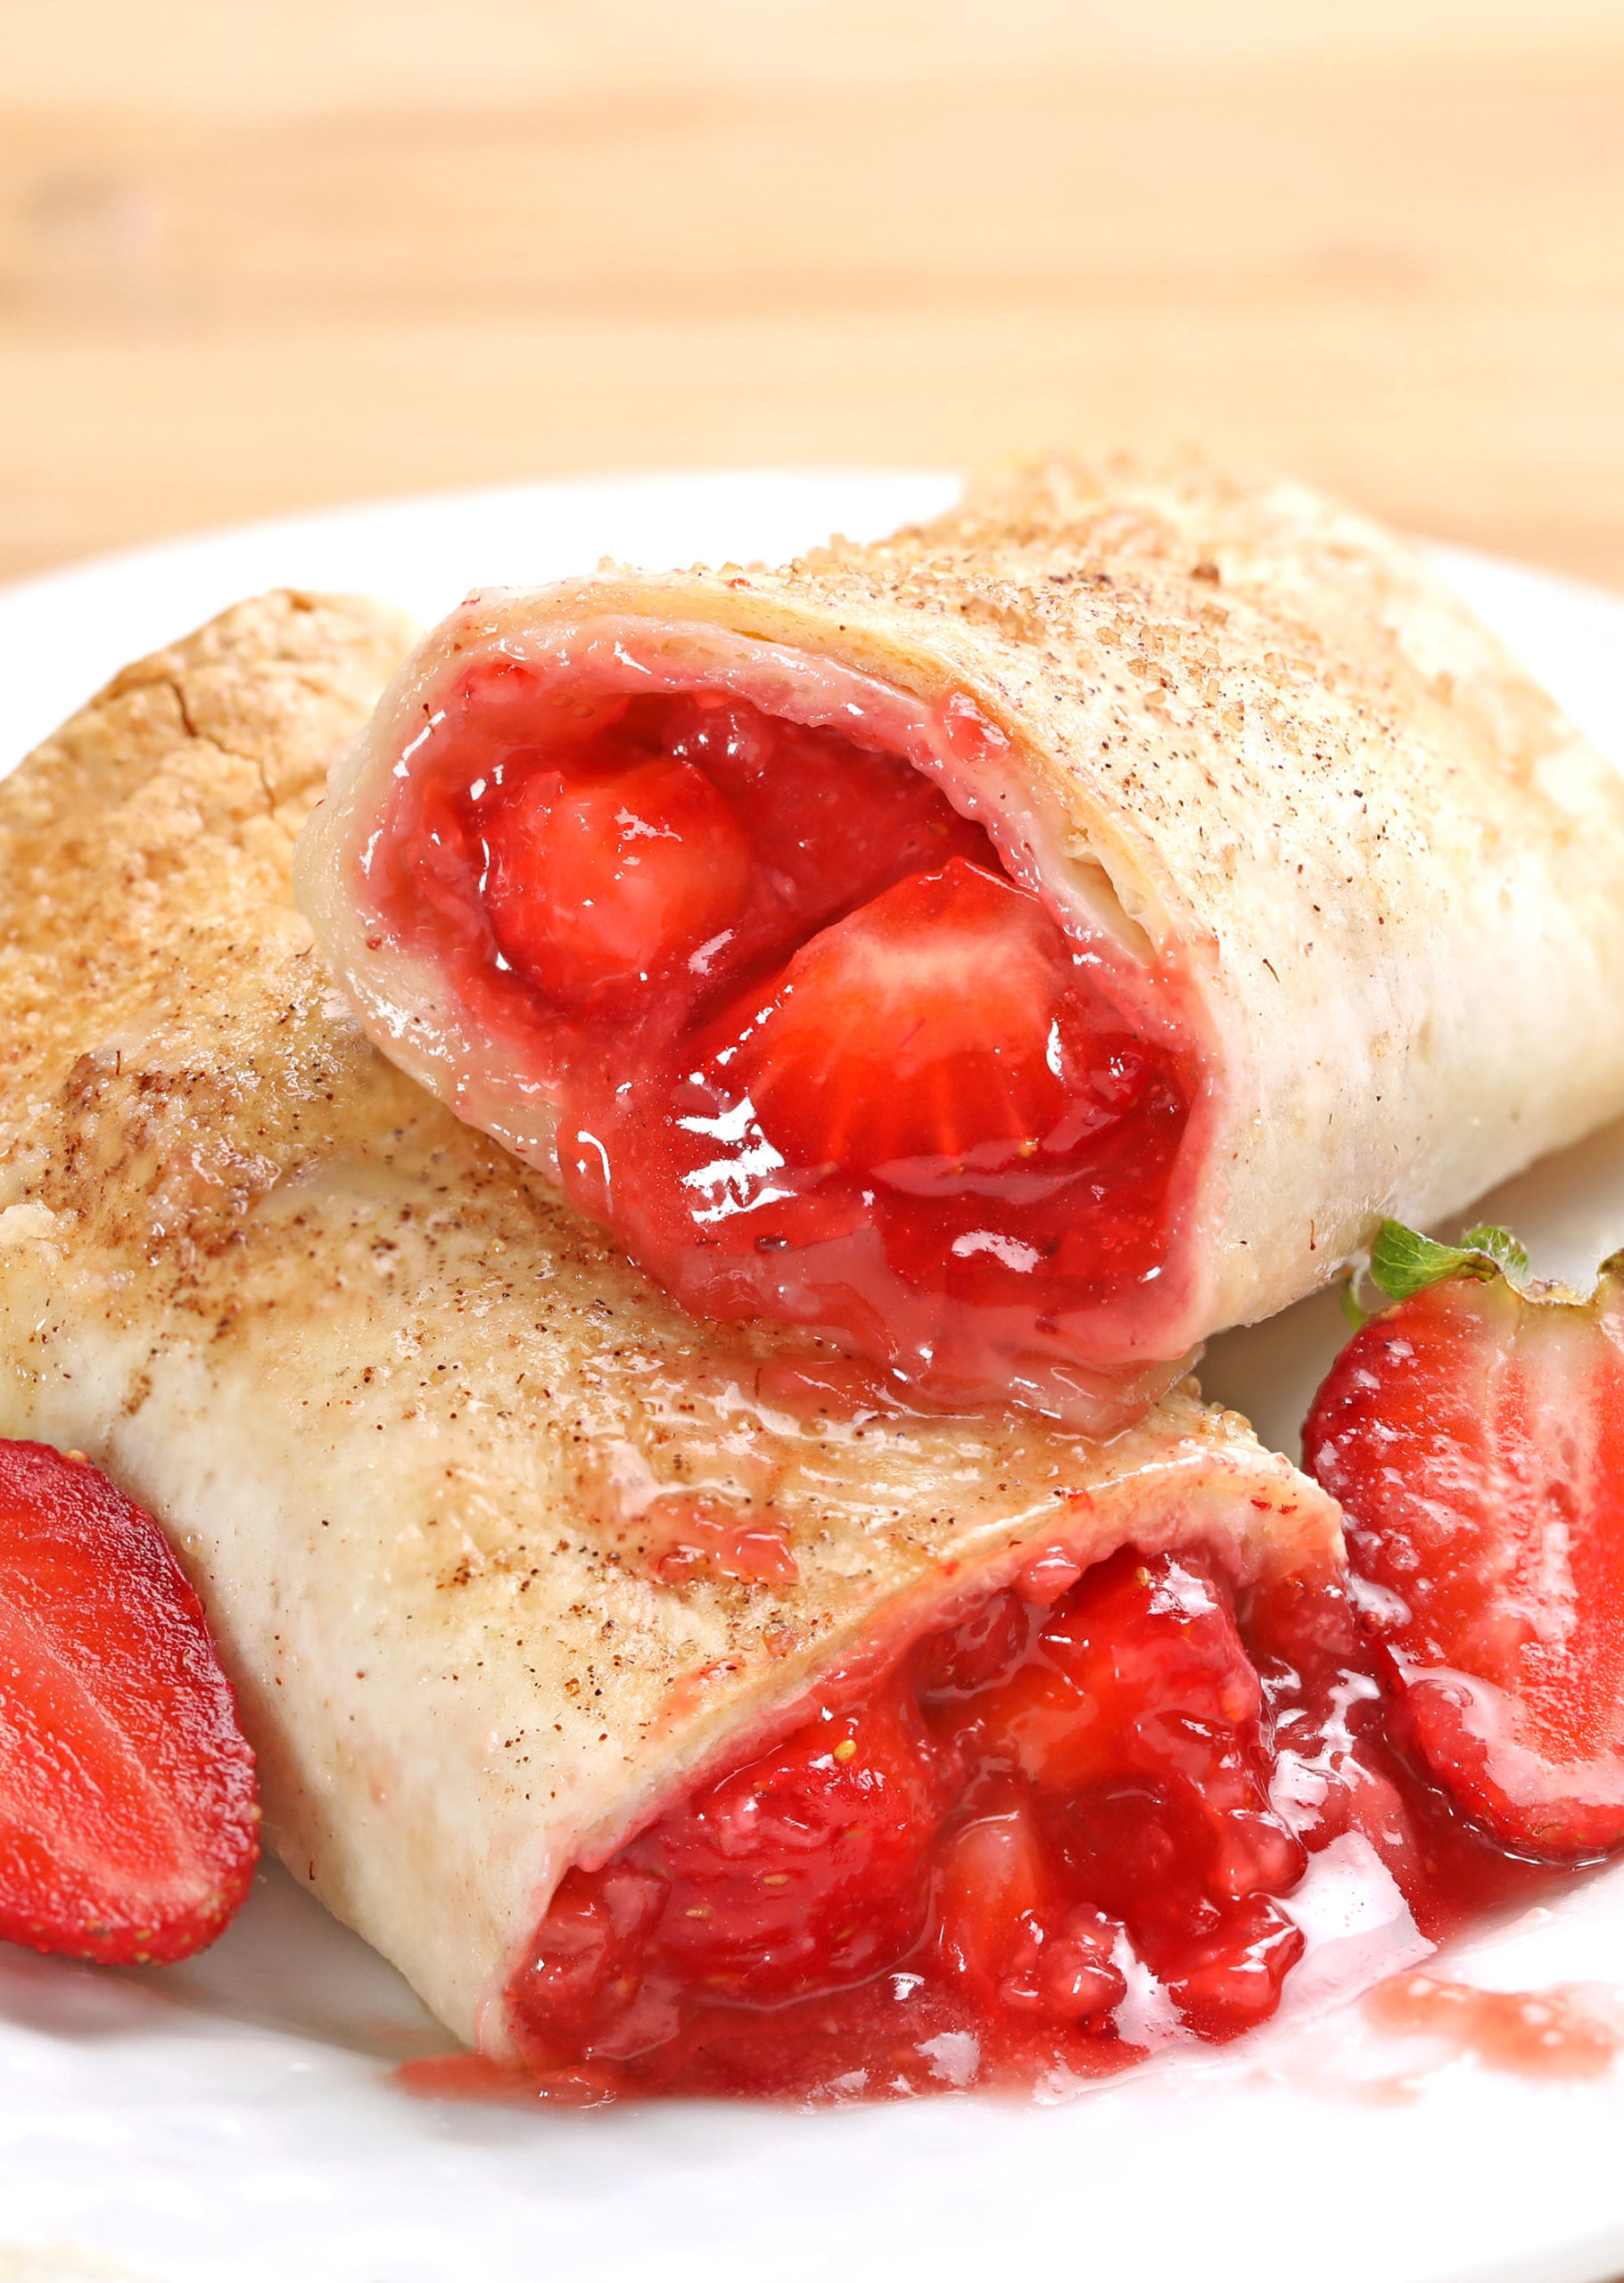 Strawberry Pie Enchiladas - It’s a bubbly, gooey, buttery, and berry miracle! Strawberry Pie filling made with fresh strawberries rolled in tortillas and coated with cinnamon sugar. #strawberry #enchiladas